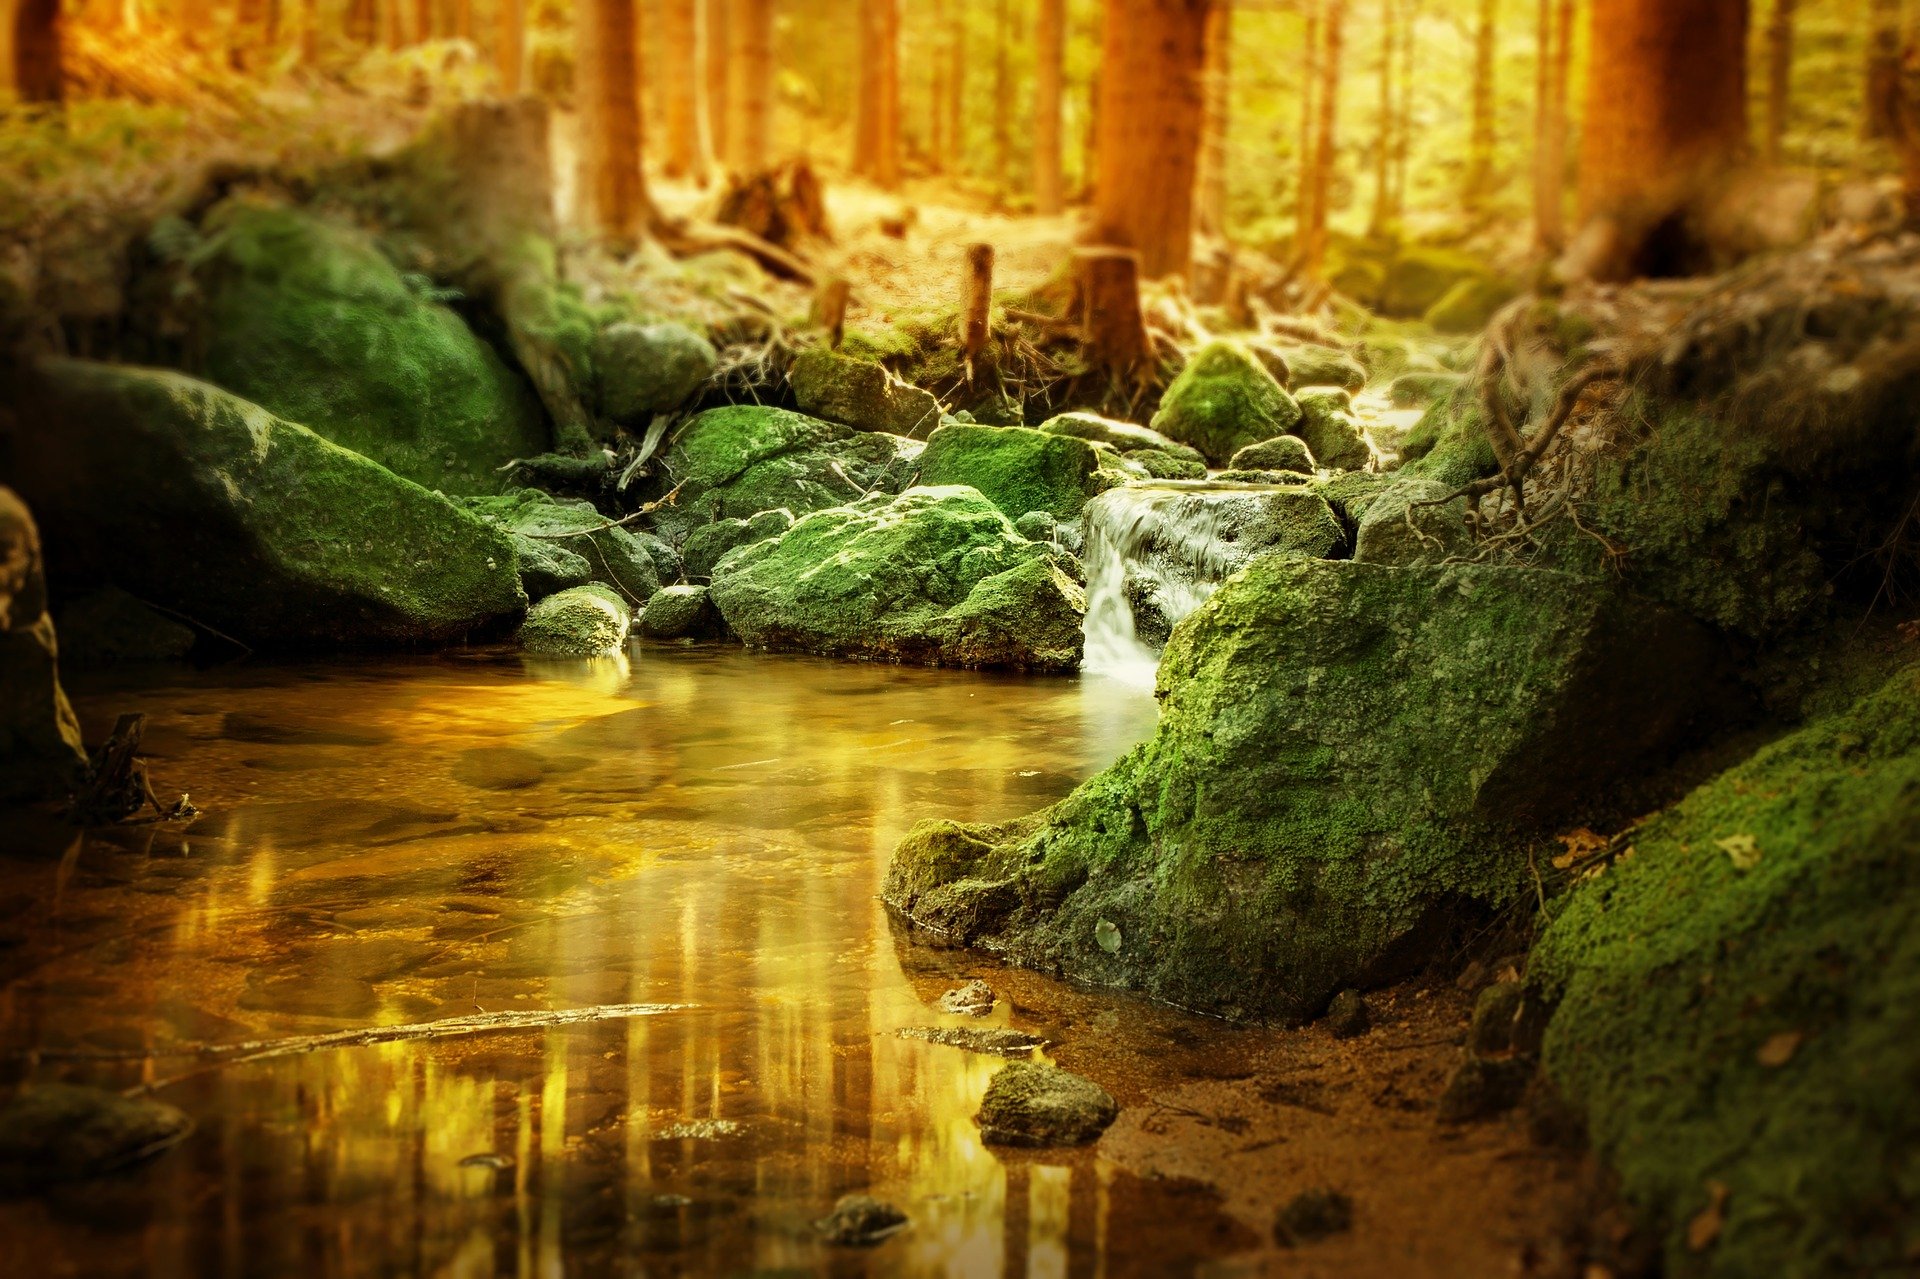 Forest pool. Image by DarkmoonArt_de from Pixabay 